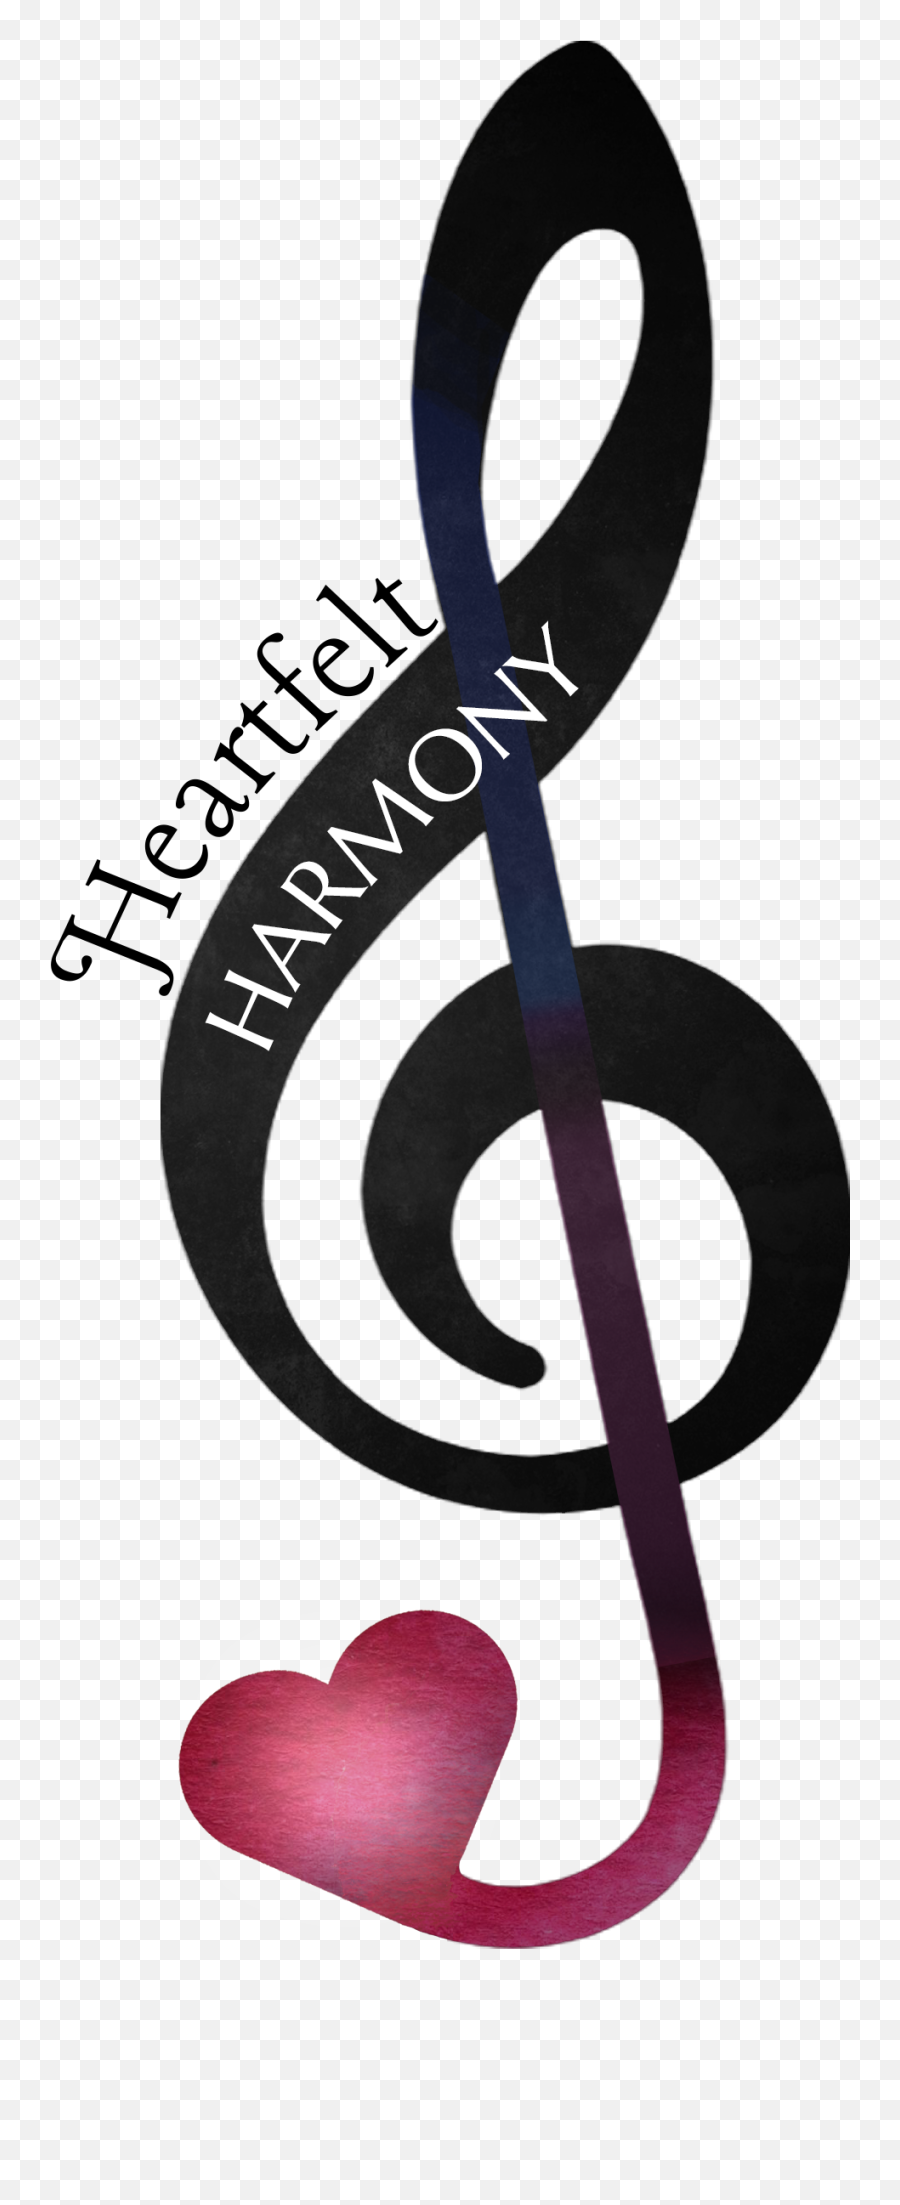 Blog Heartfelt Harmony Music Therapy Services - Music Note Emoji,The Emotions Christmas Songs